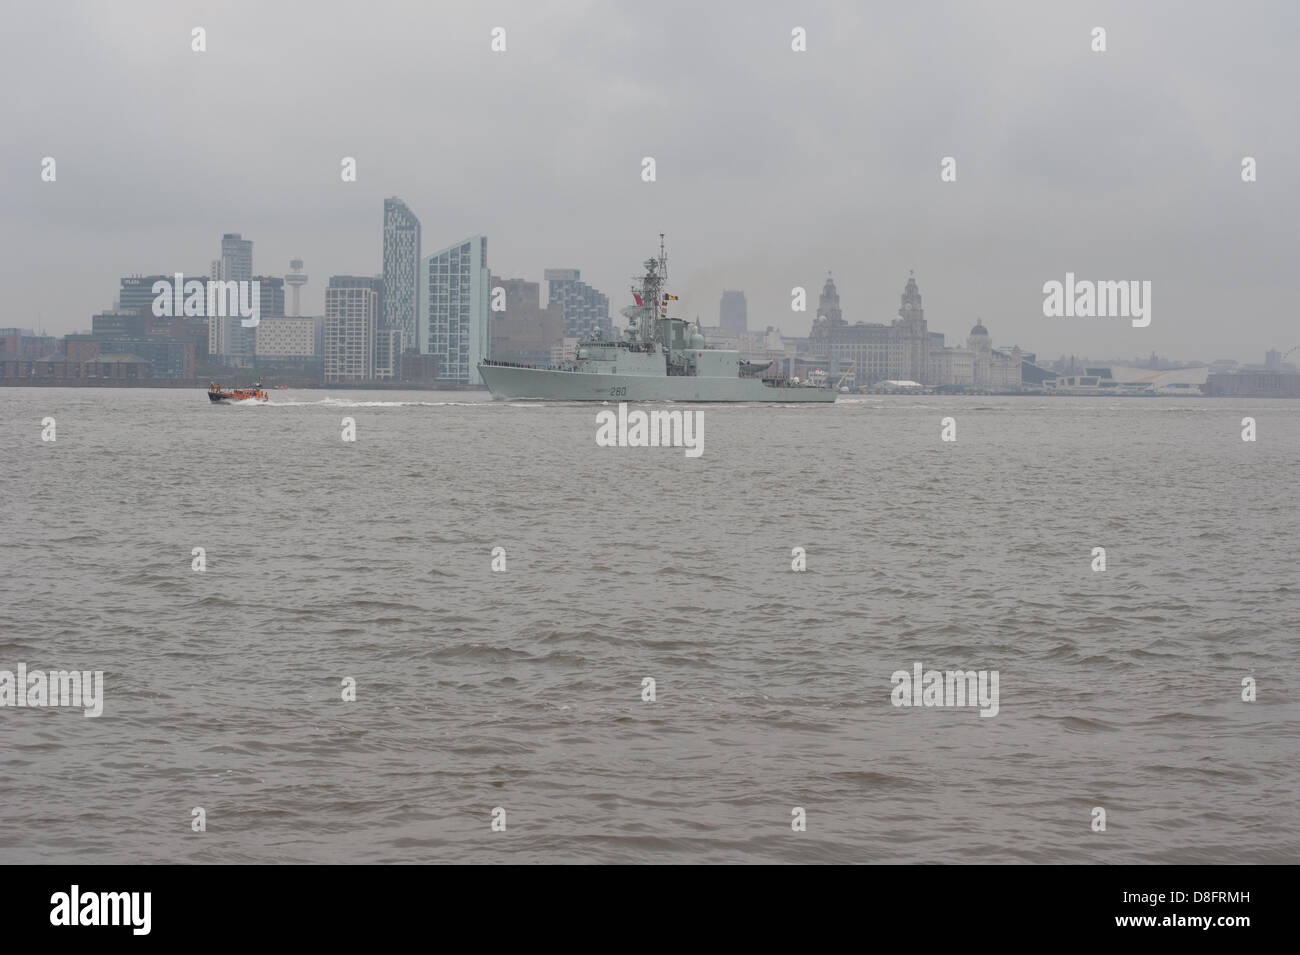 LIVERPOOL, UK, 28th May, 2013. A fleet of Royal Navy ships leave Liverpool after spending the Bank Holiday weekend there as part of the 70th Anniversary of the Battle of the Atlantic. Credit:  Peter Carr / Alamy Live News Stock Photo